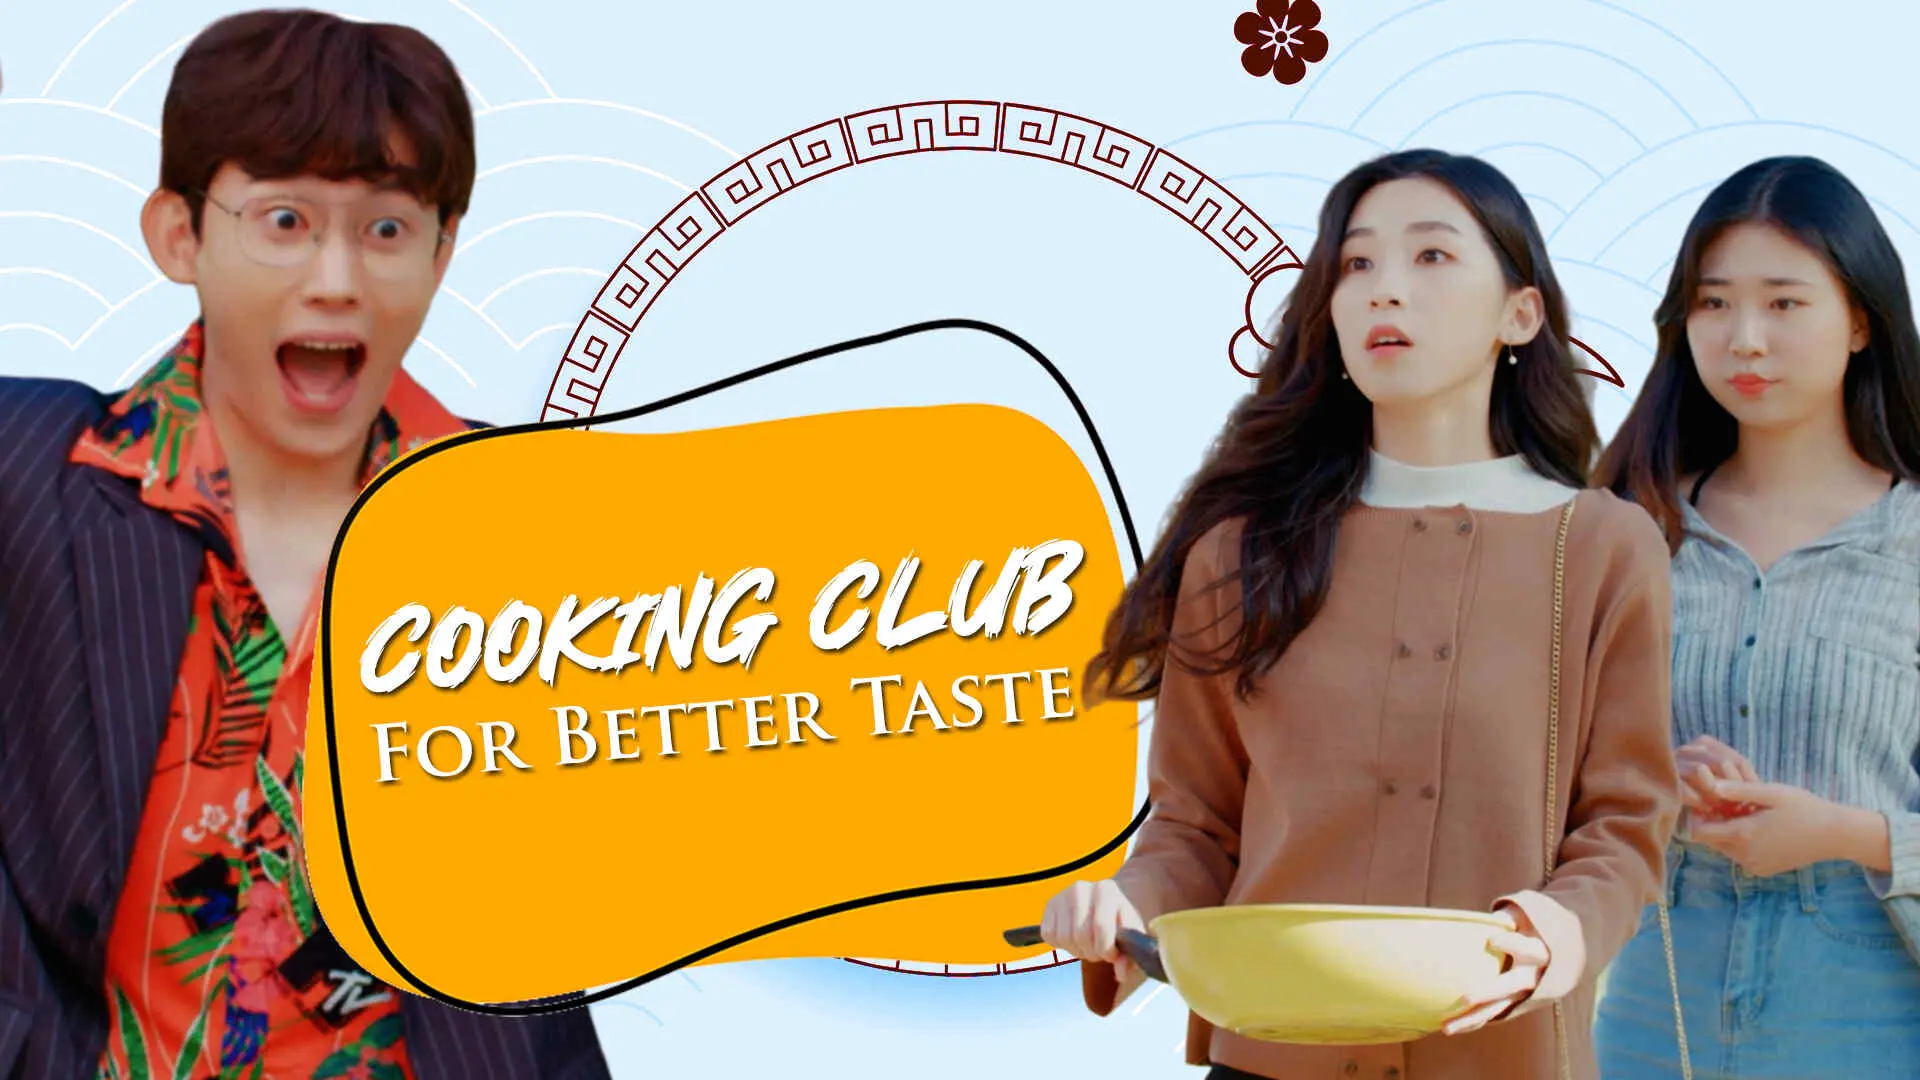 Cooking Club For Better Taste